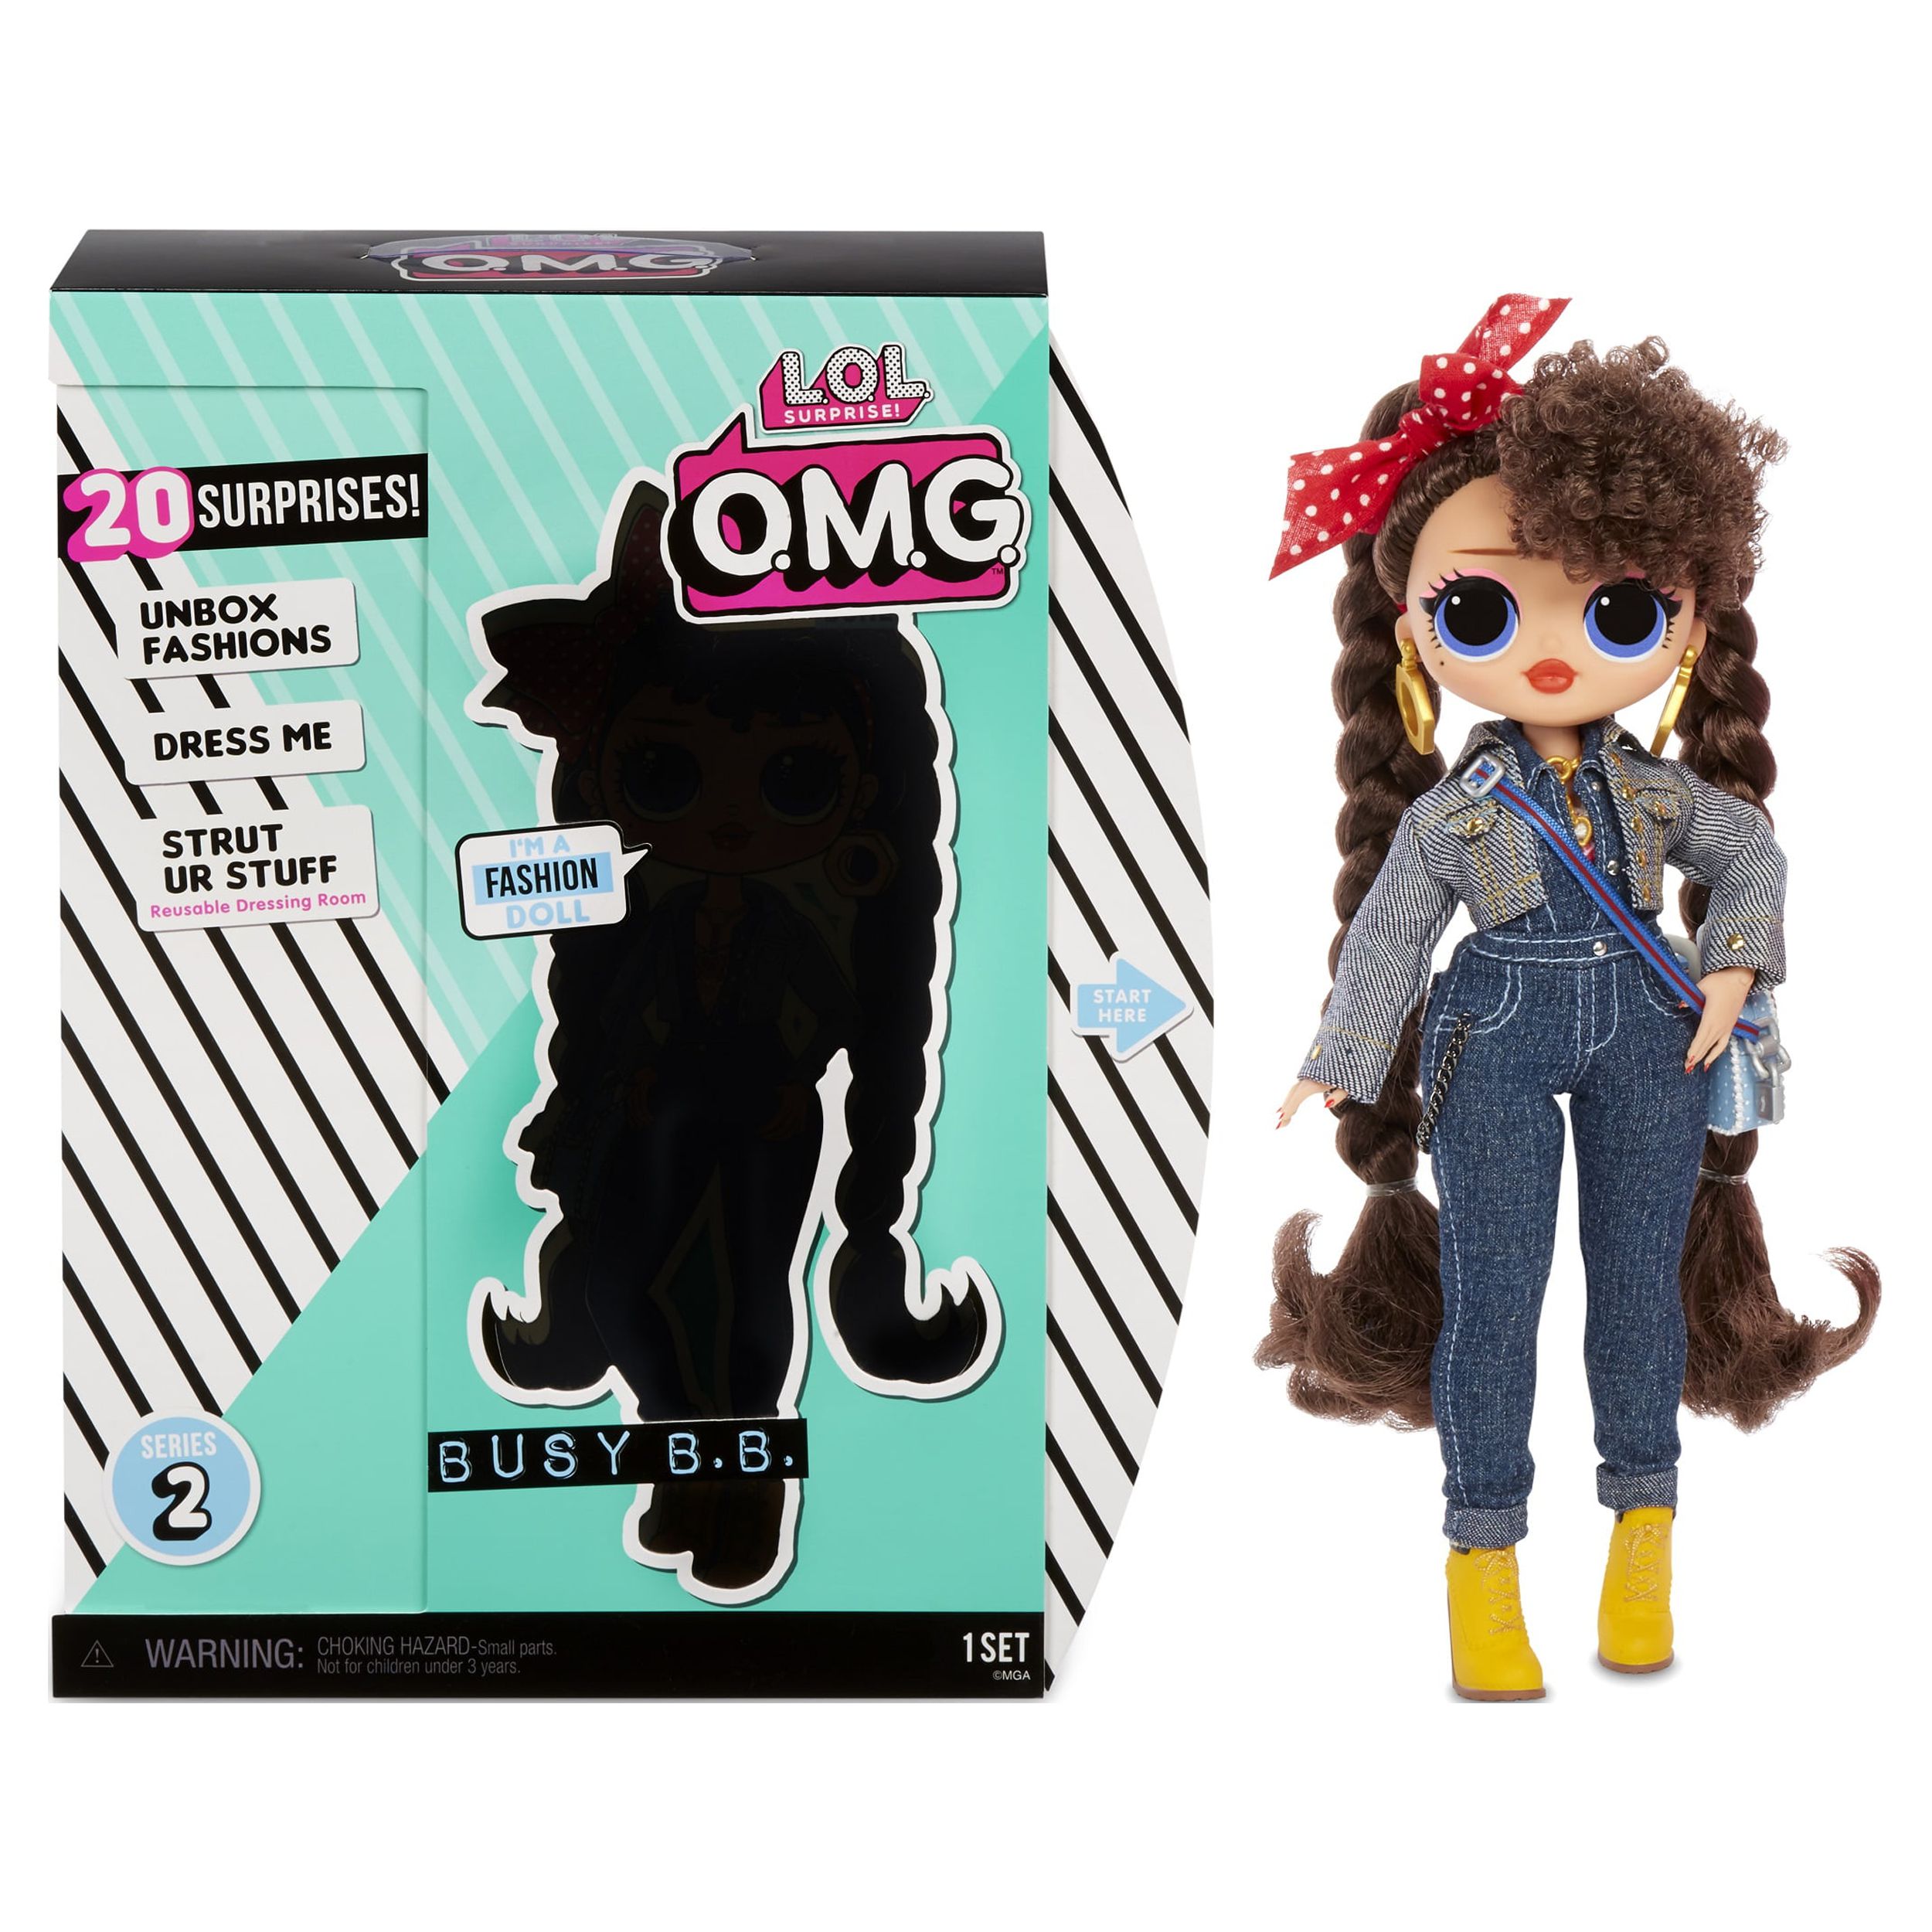 LOL Surprise OMG Busy B.B. Fashion Doll With 20 Surprises, Great Gift for Kids Ages 4 5 6+ - image 3 of 5